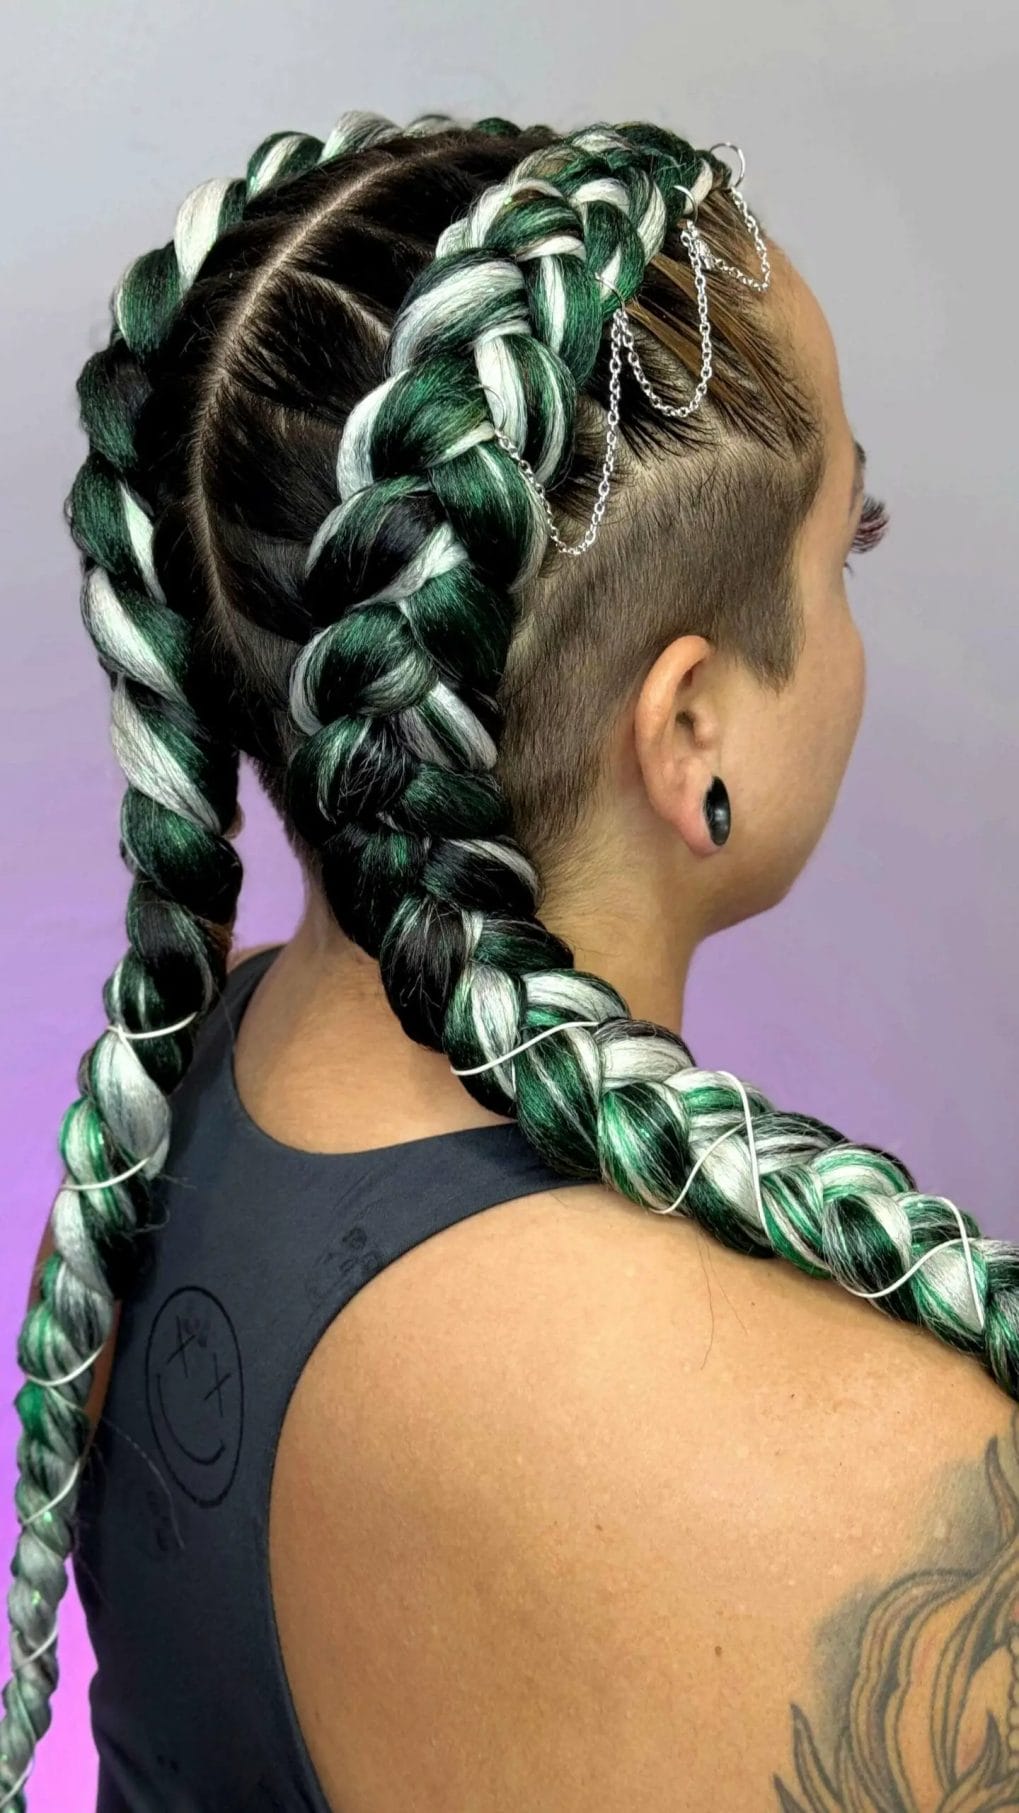 Chunky emerald green and white braids with silver chains and an undercut, blending boldness with festival style.